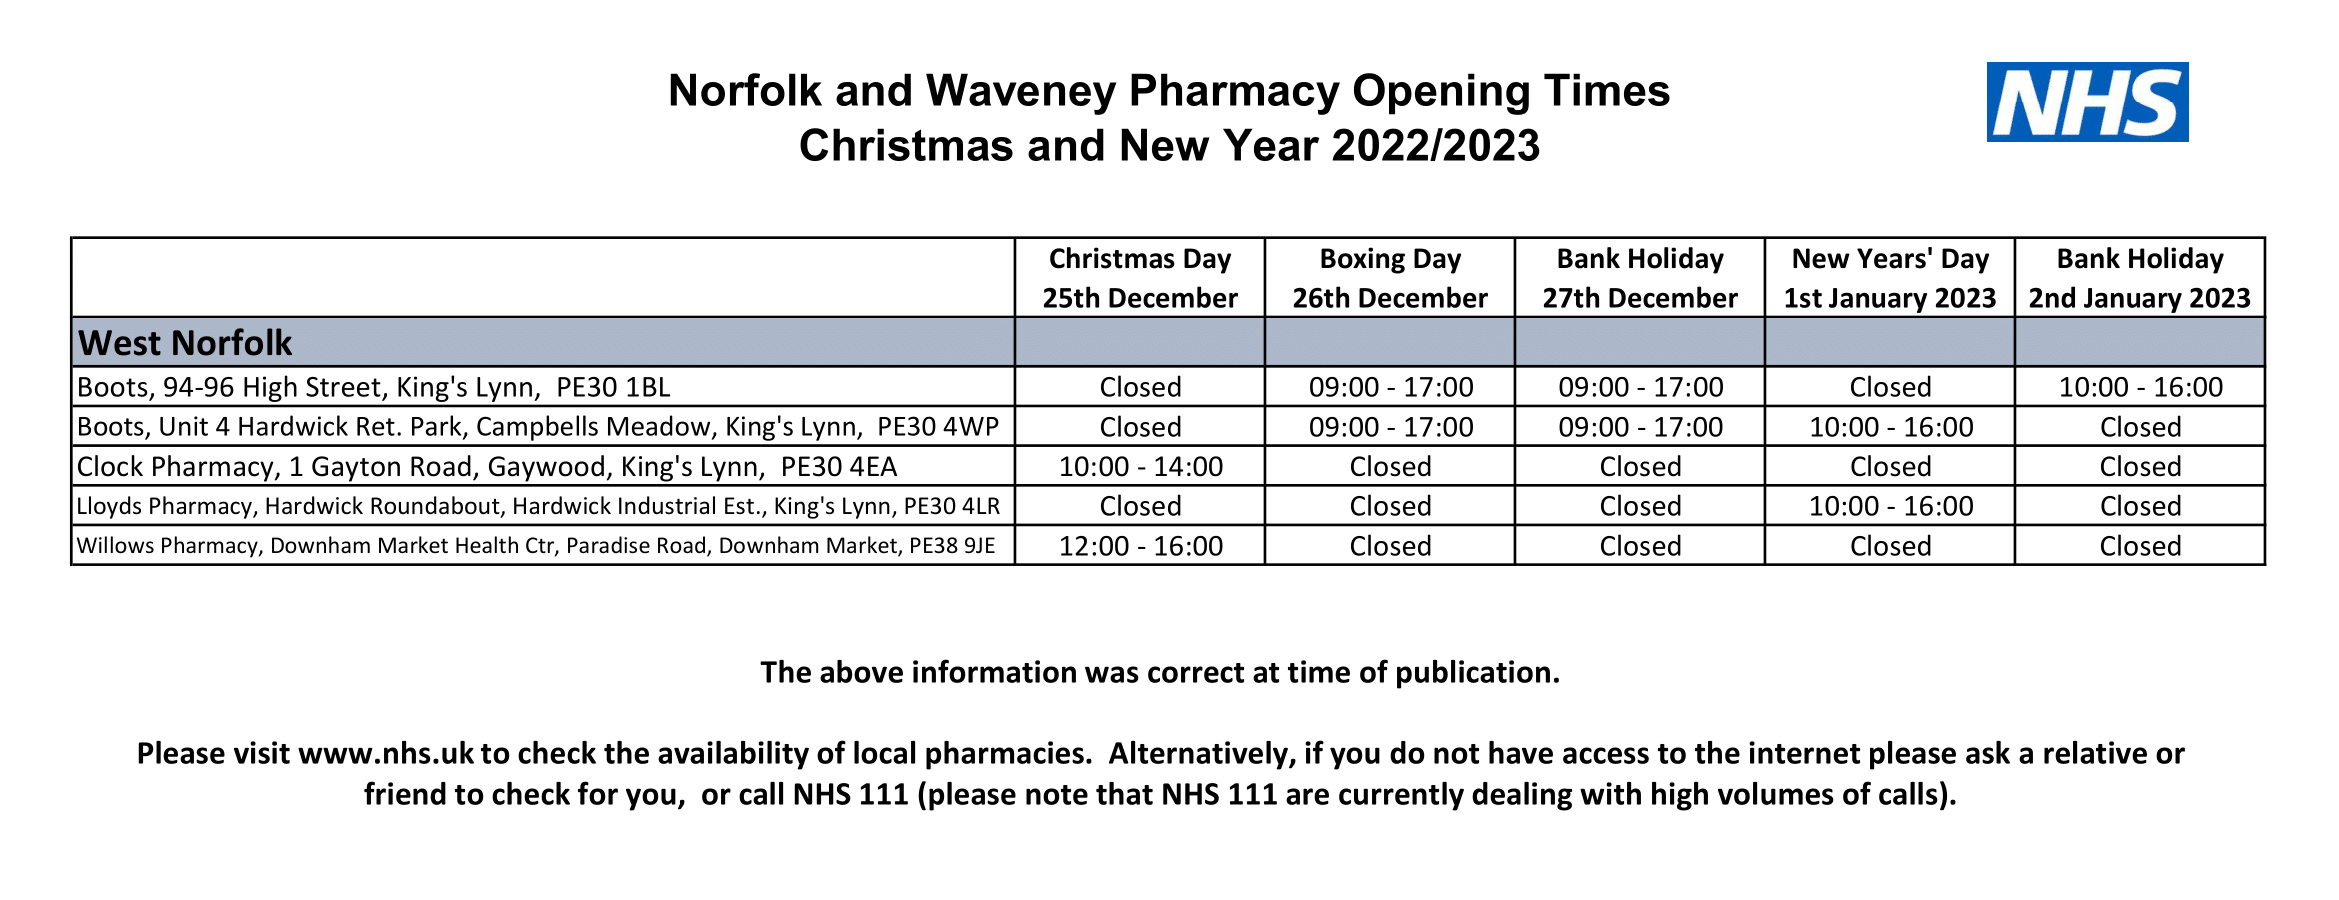 Christmas opening times for Norfolk pharmacies 